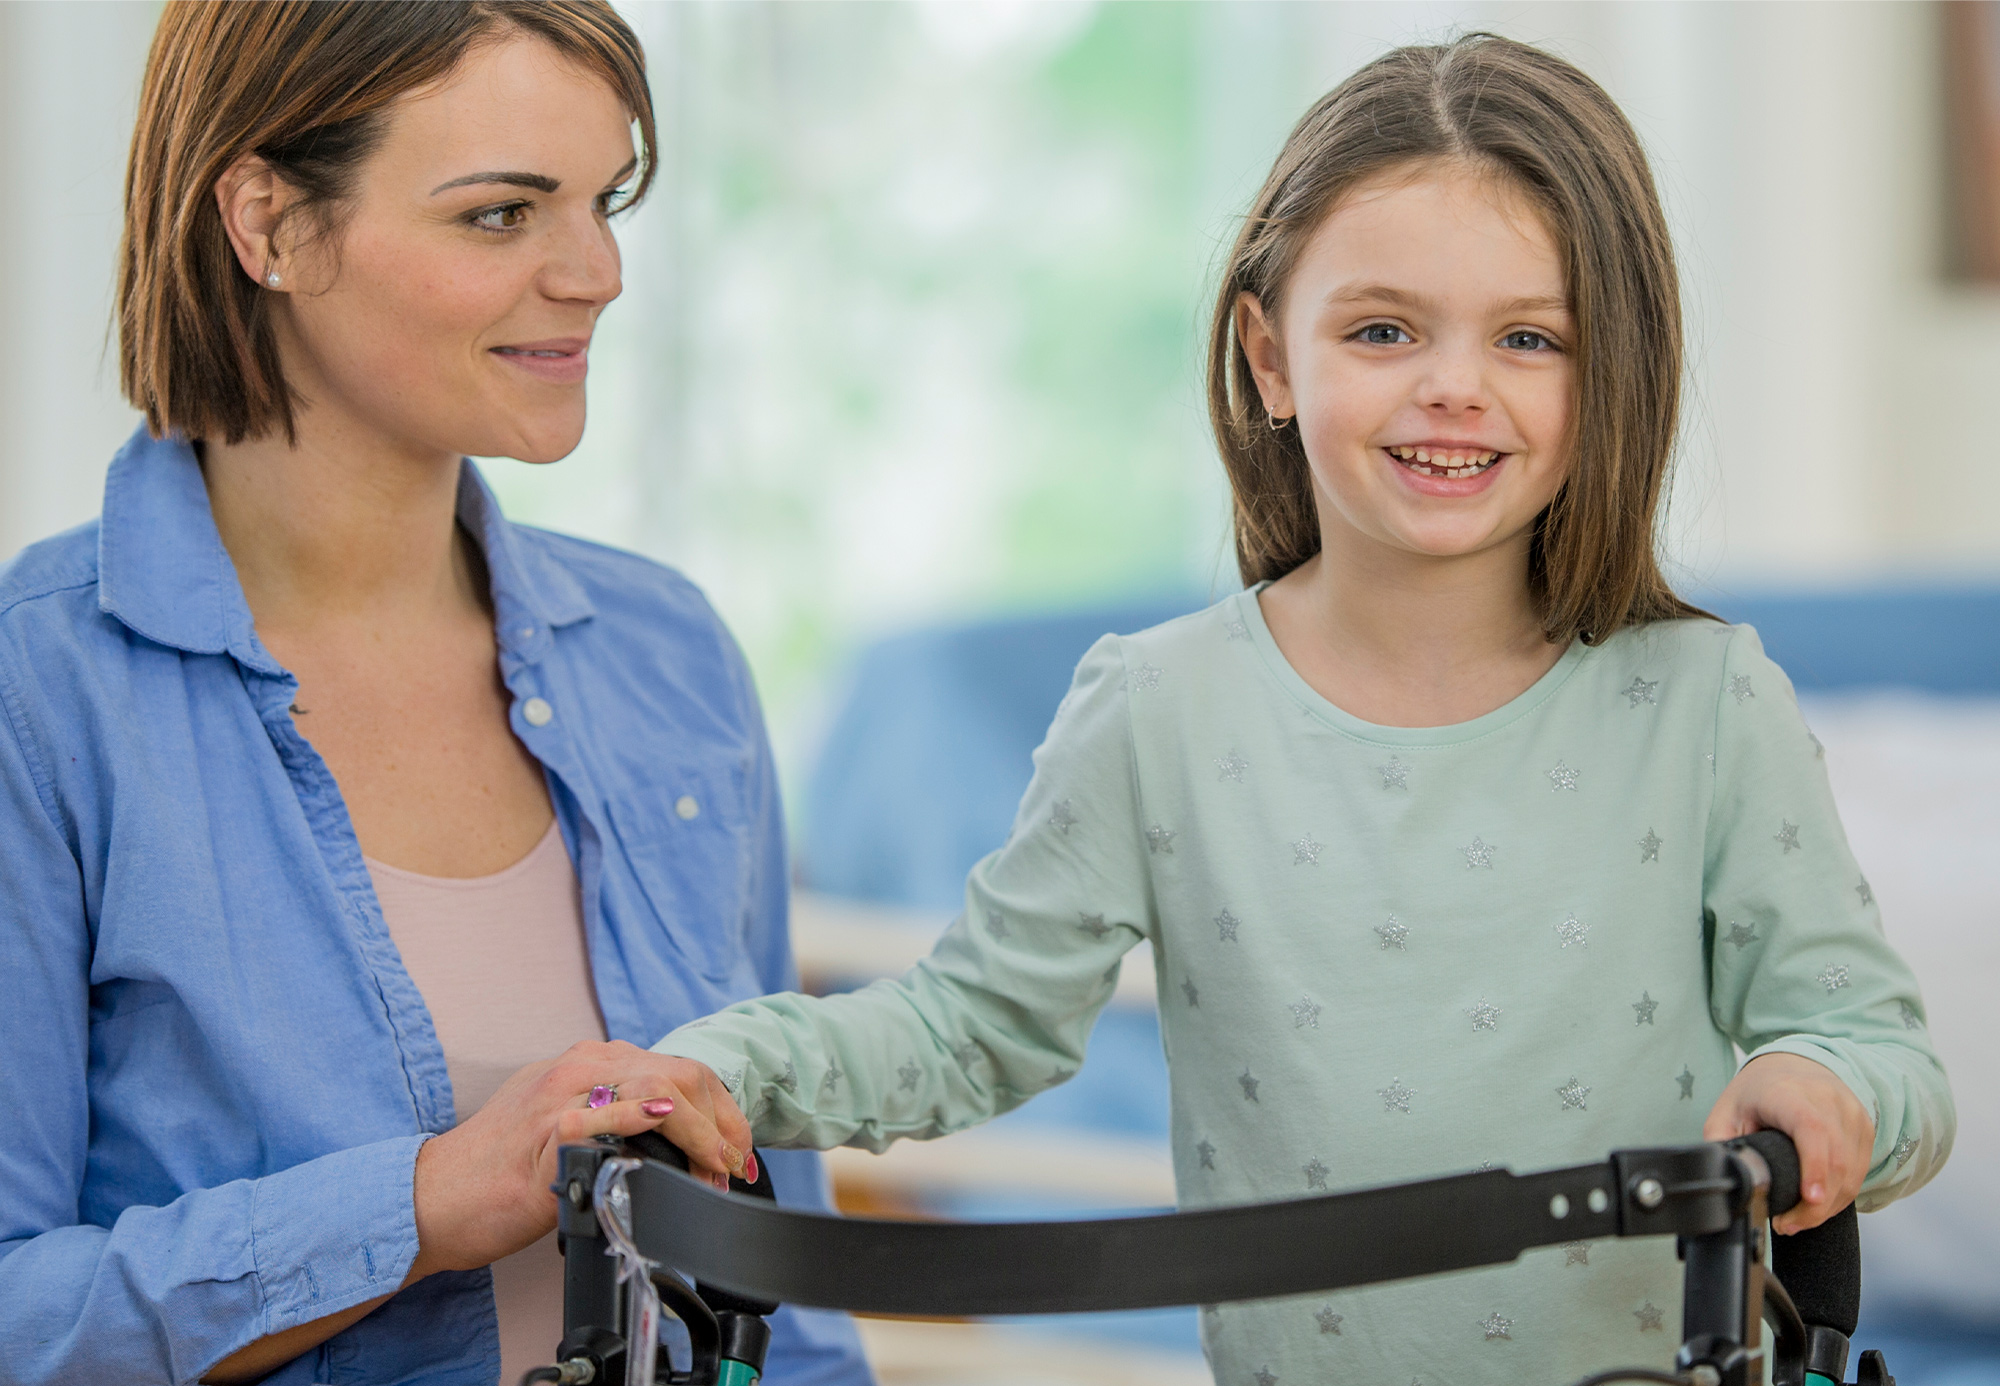 A young disabled girl smiling on a walker next to her female carer